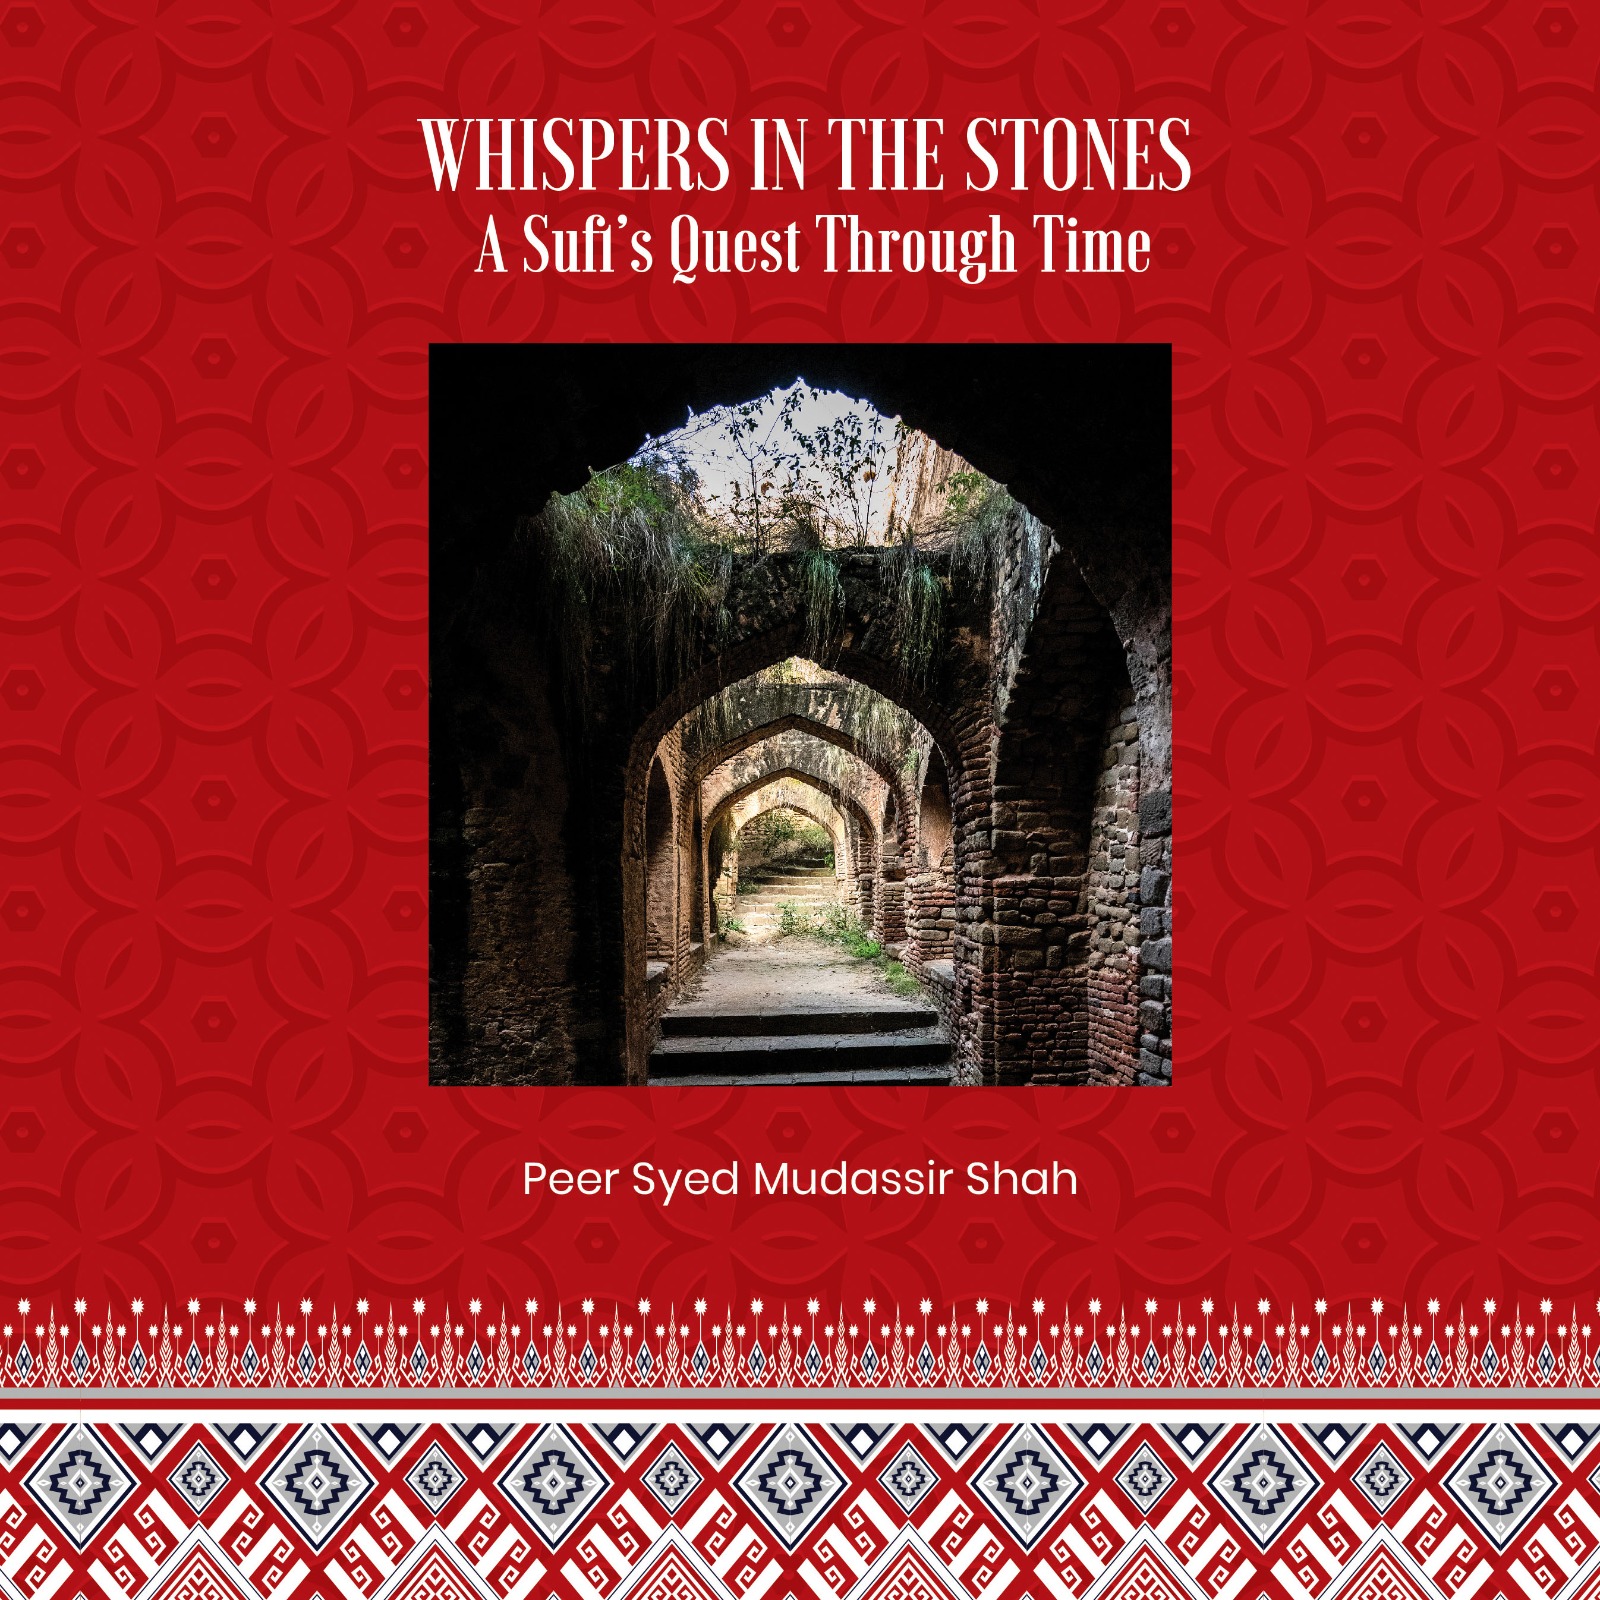 Whispers in the Stones: A Sufi's Quest Through Time